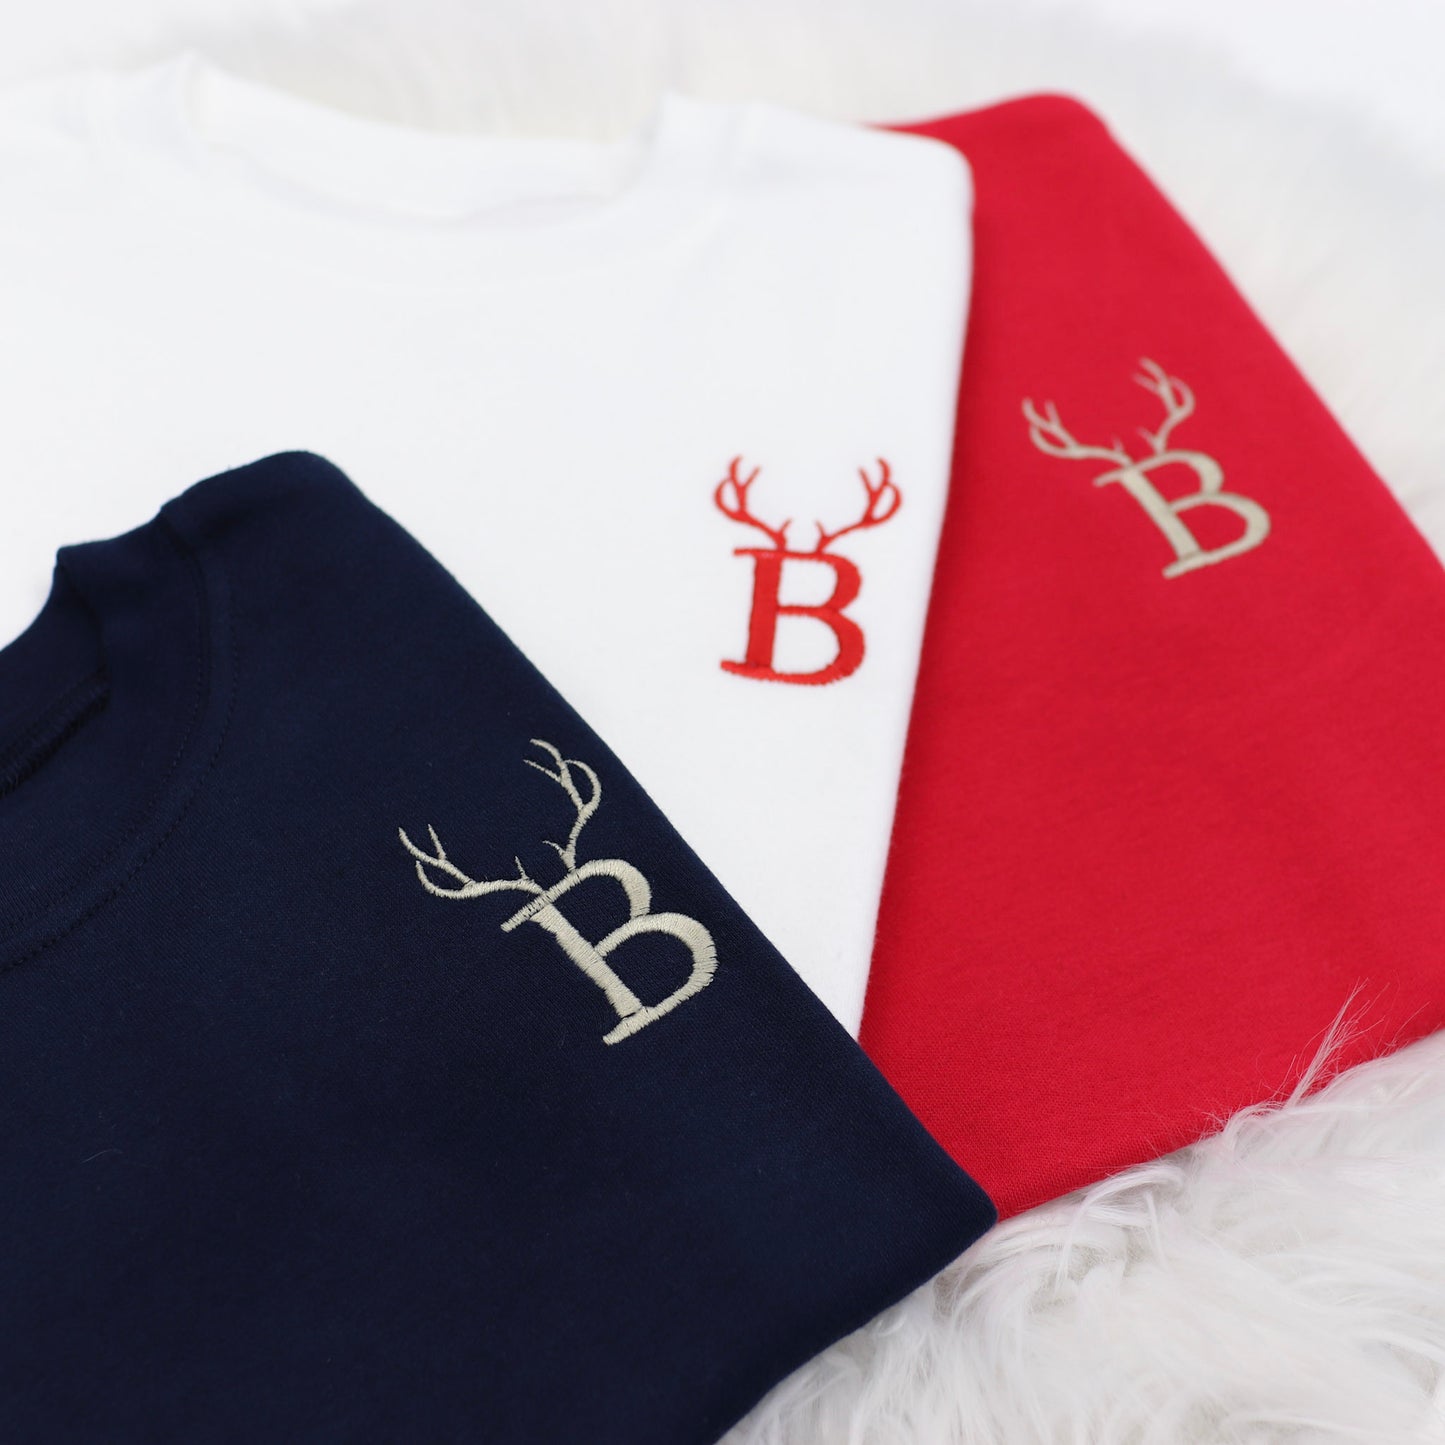 Delicate Antler Pocket Initial Embroidered T-Shirt